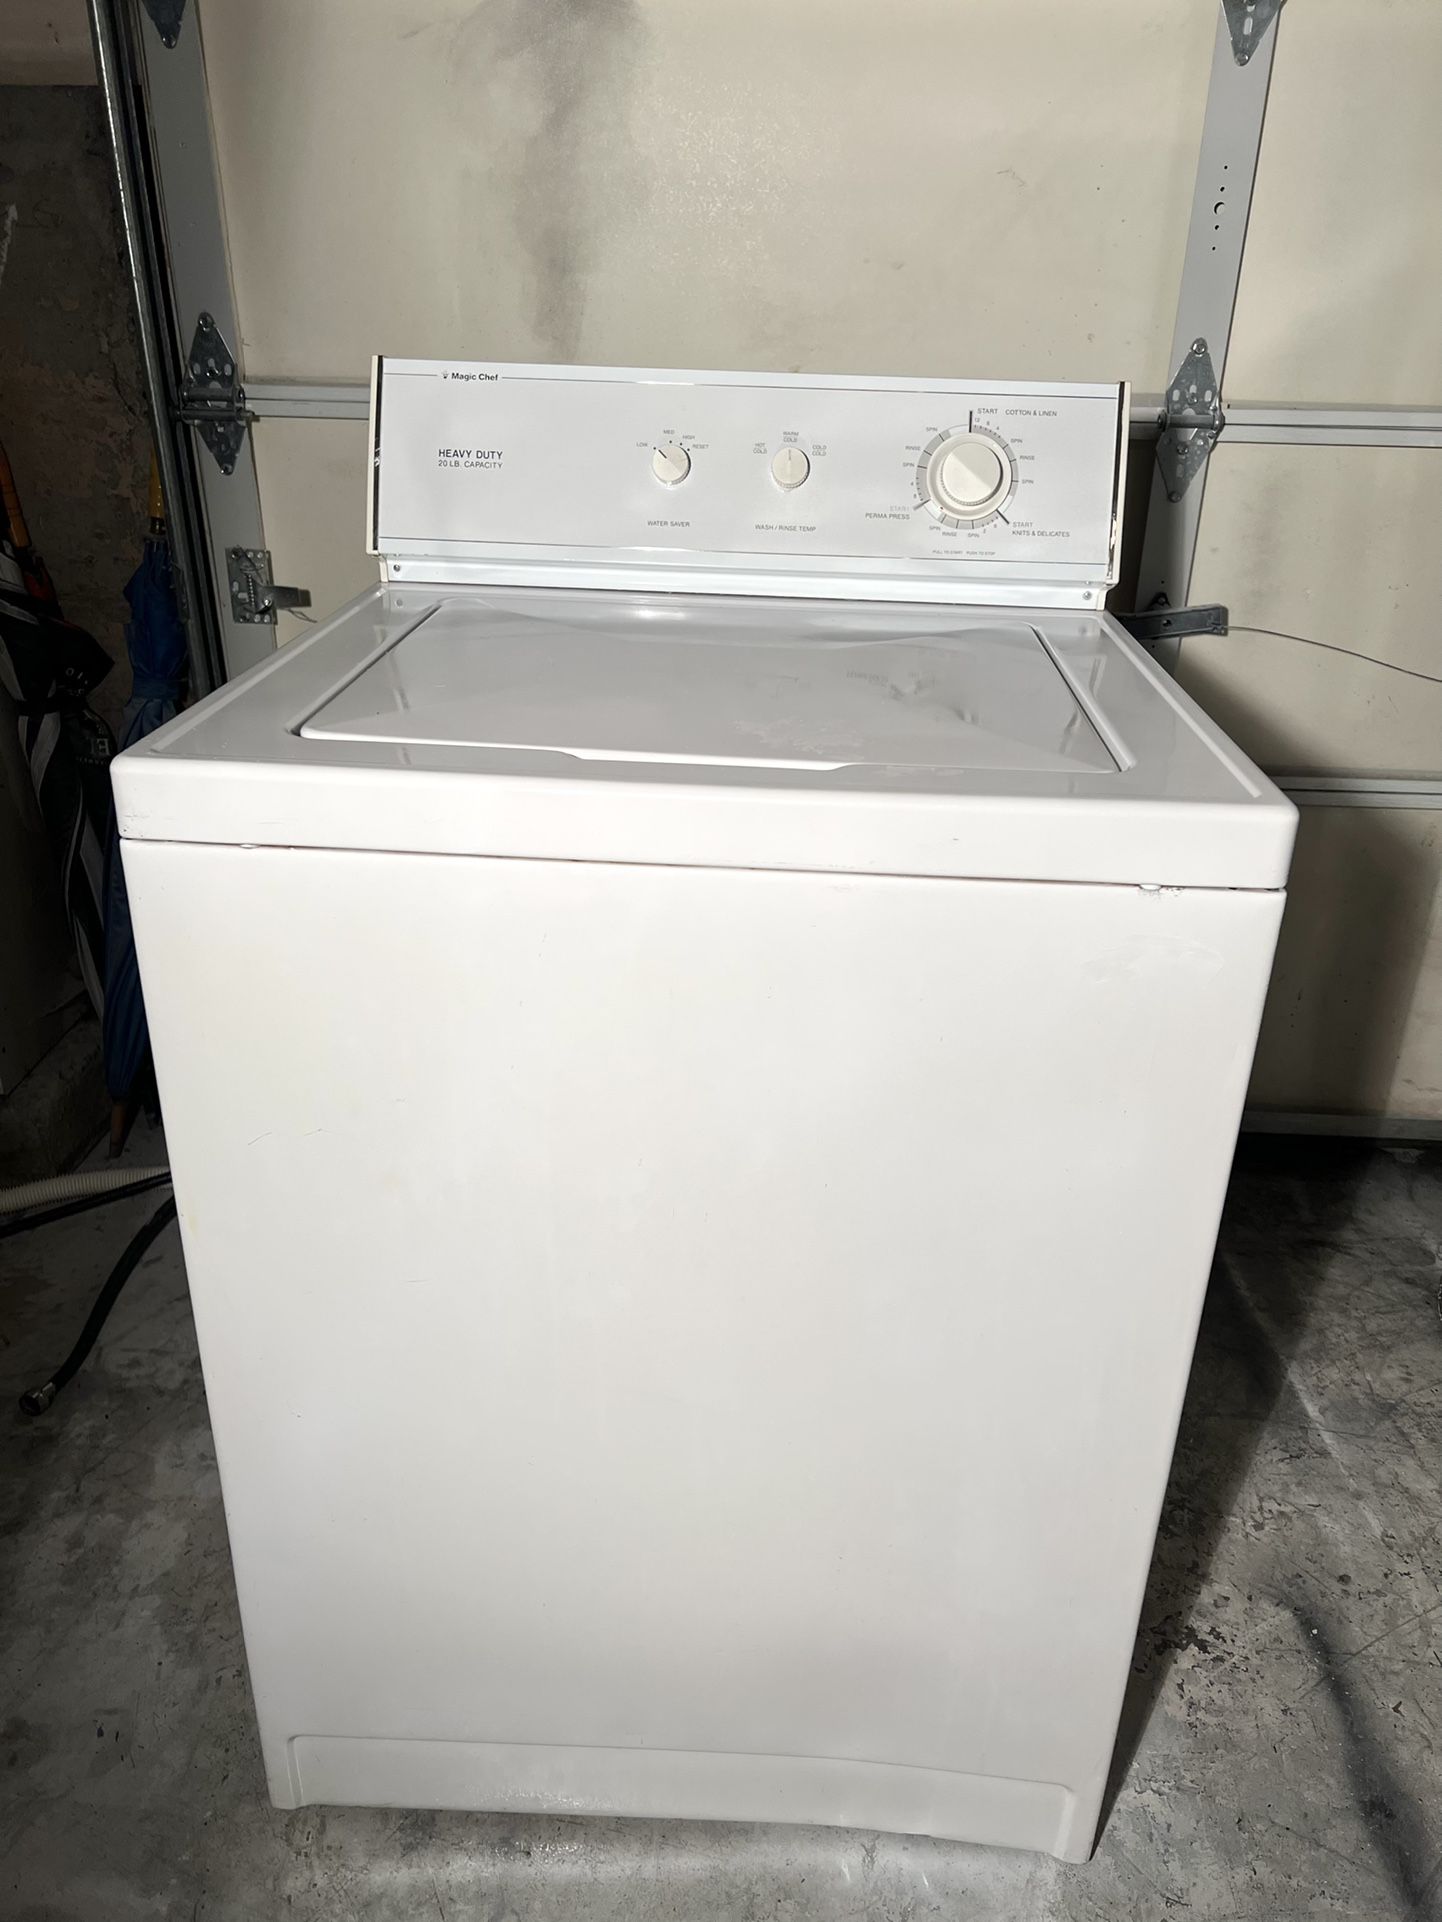 Magic Chef Portable Washer MCSTCW09 FODKR for Sale in Glendale, AZ - OfferUp